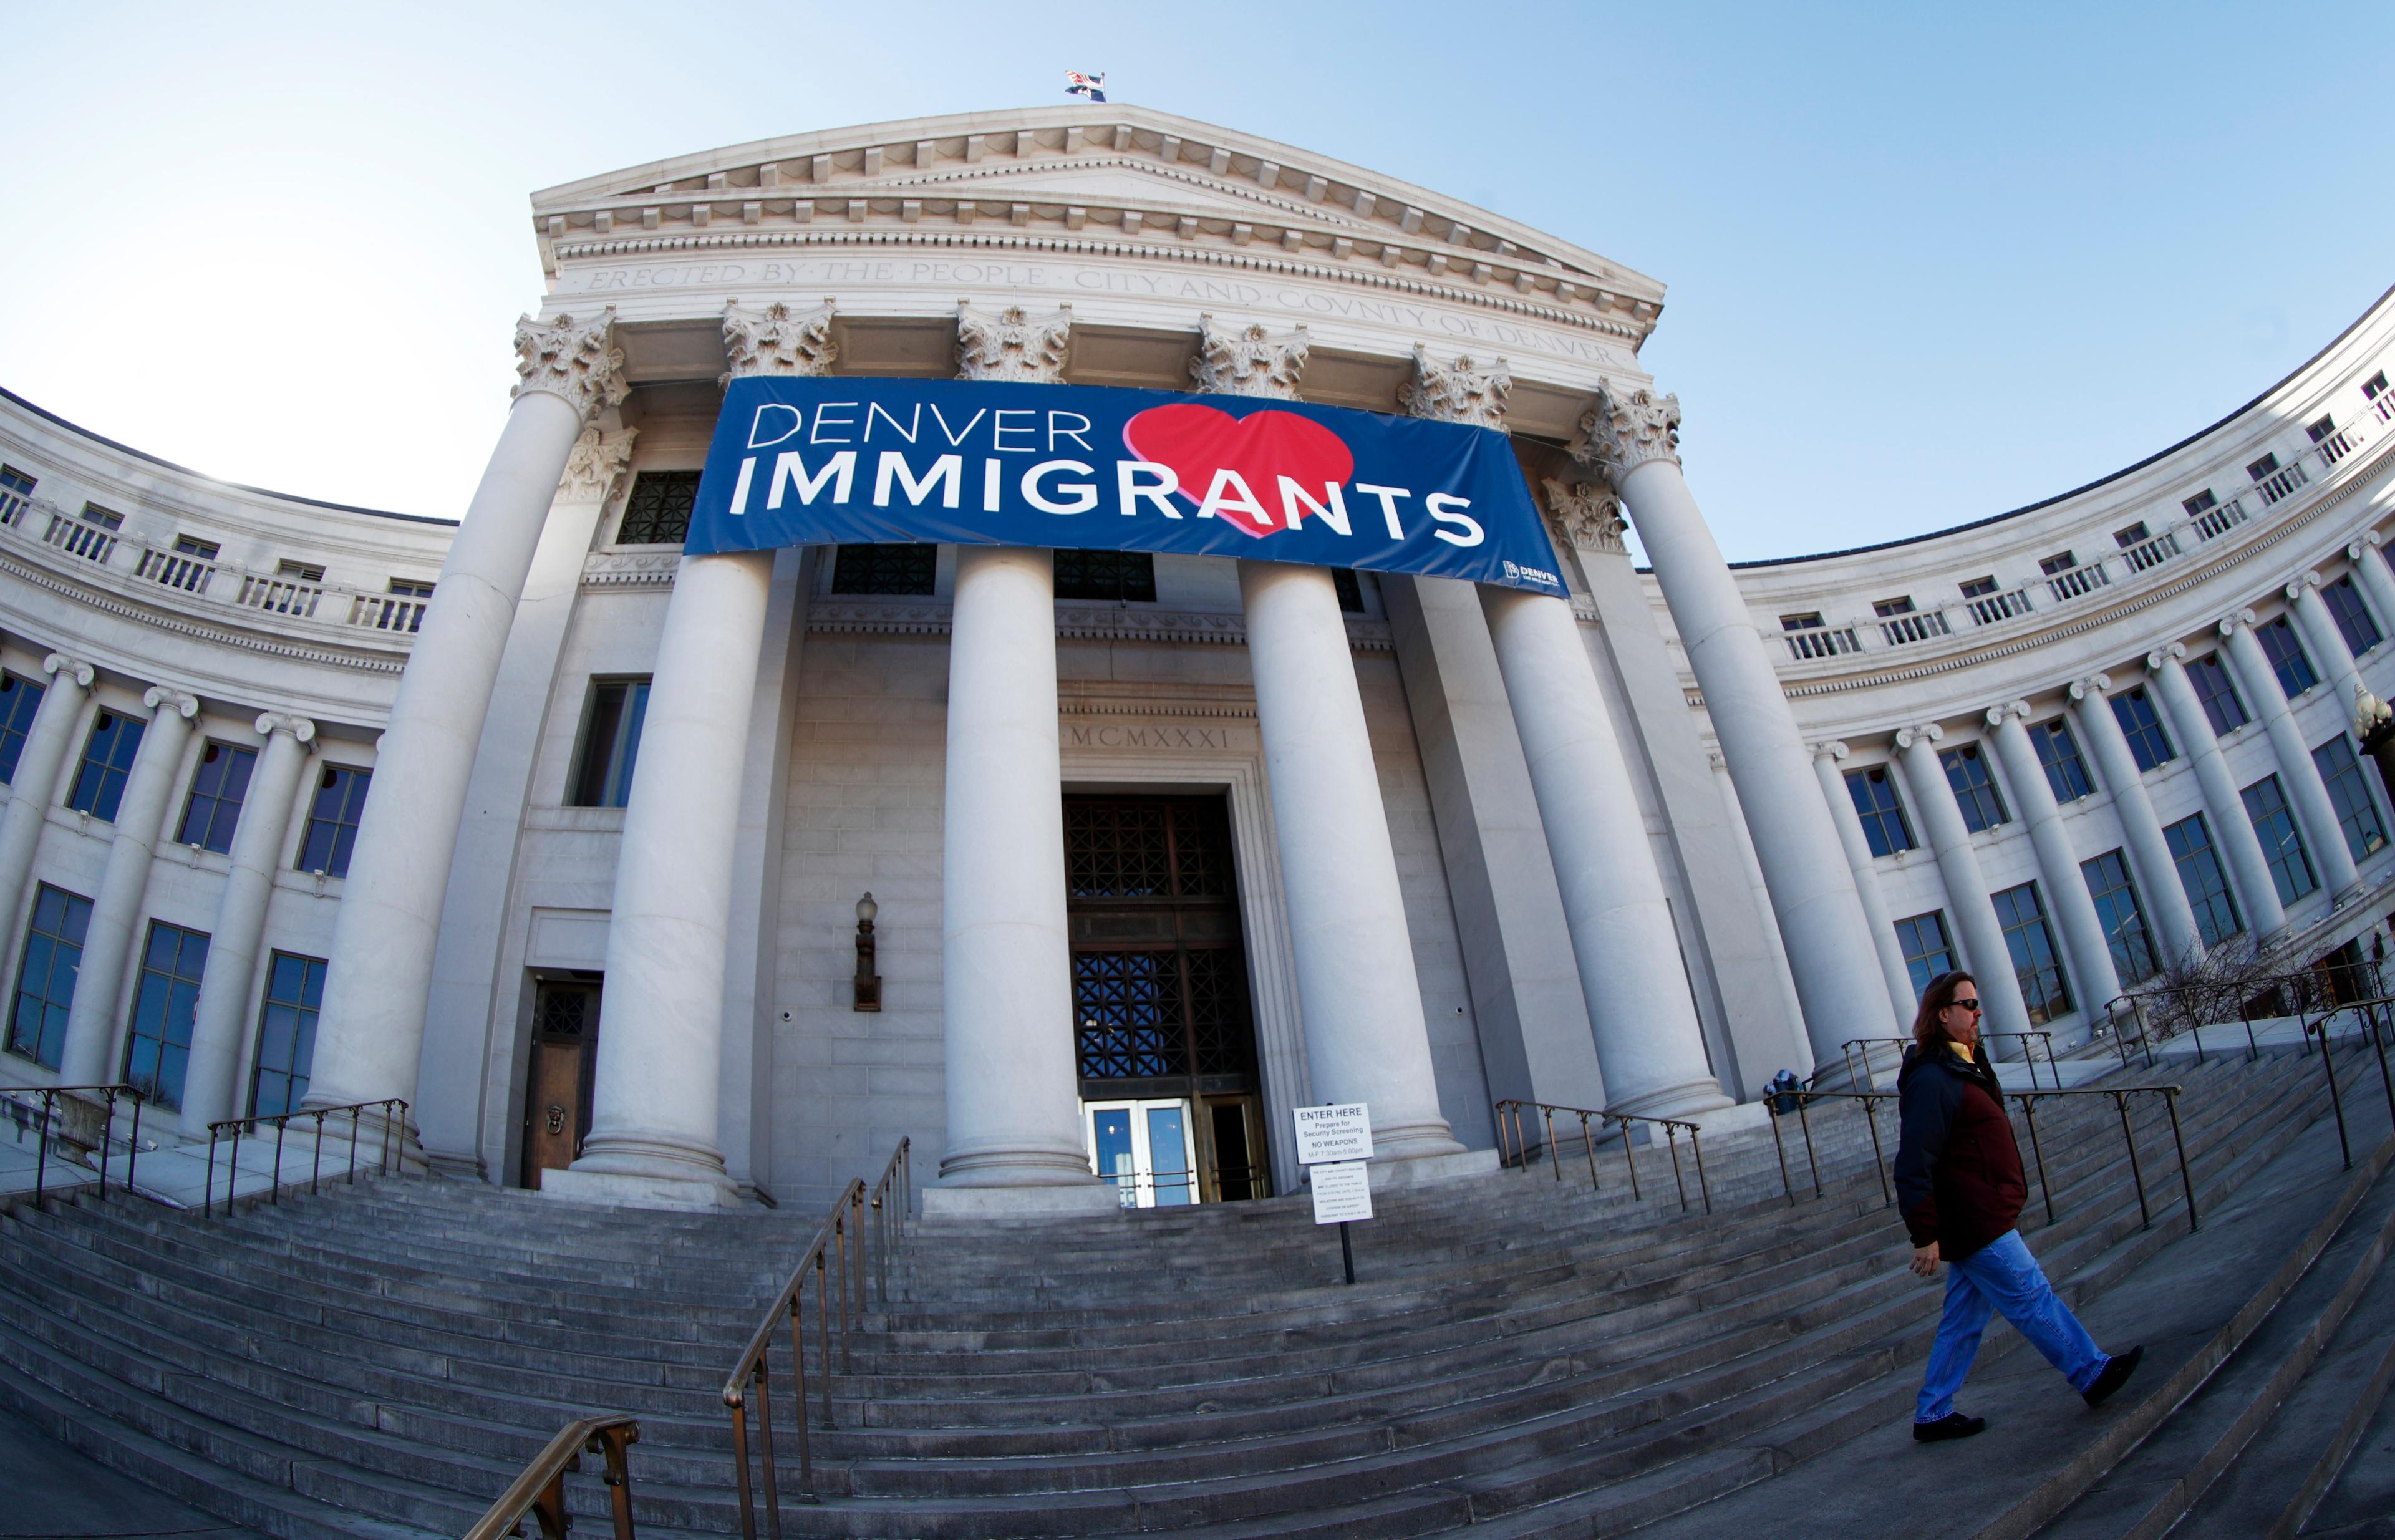 Immigrant Welcome Banner over steps of Denver City and County Building